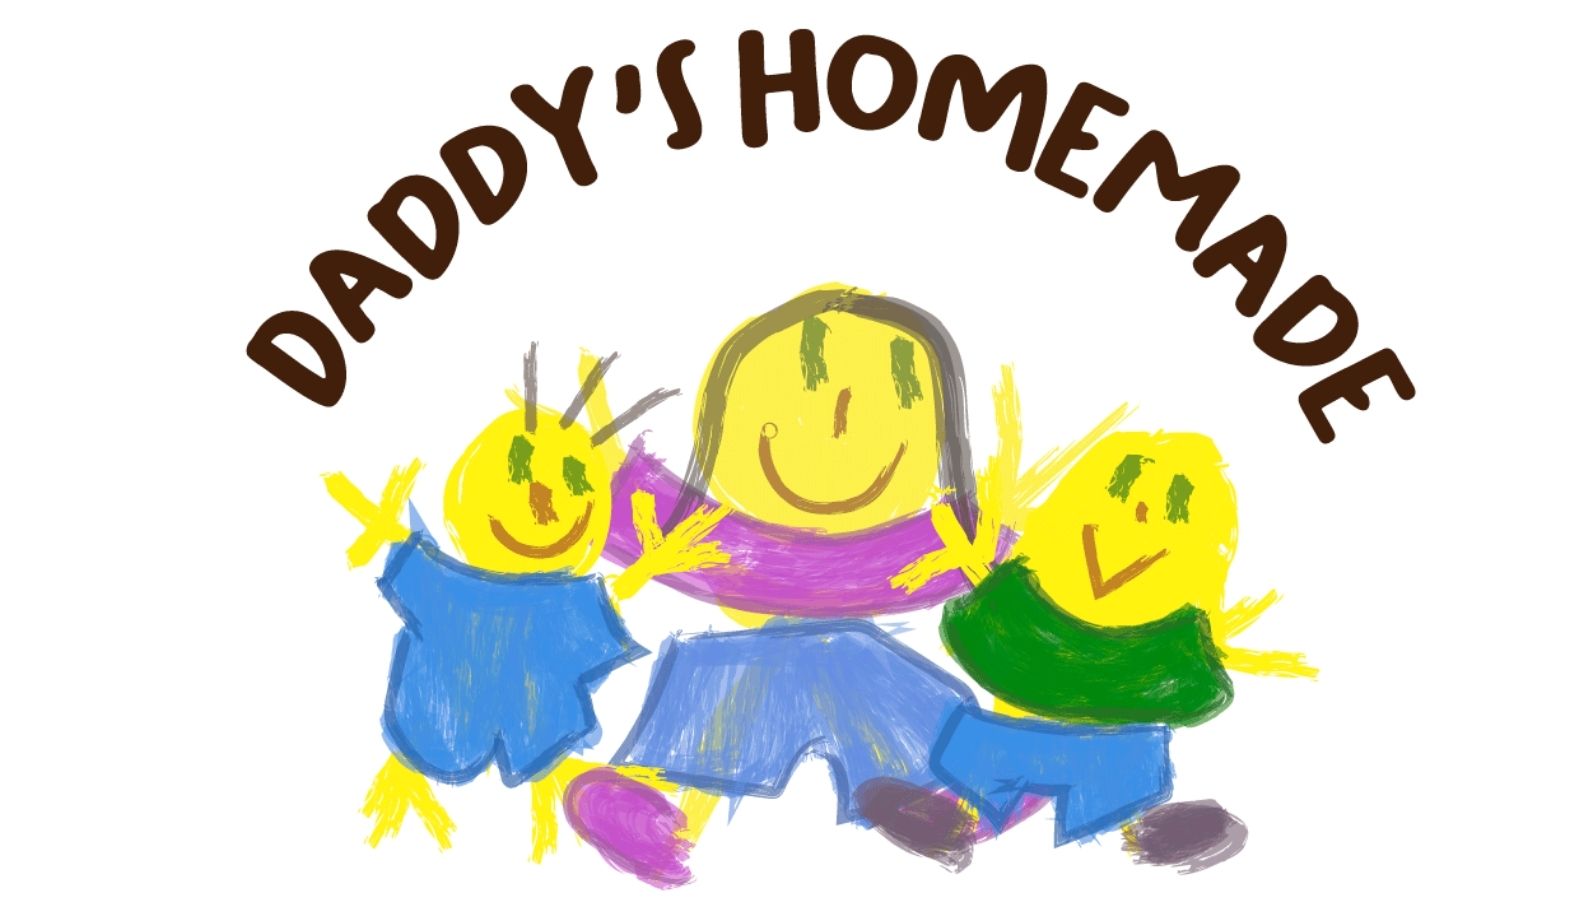 Daddy's Homemade (2) 